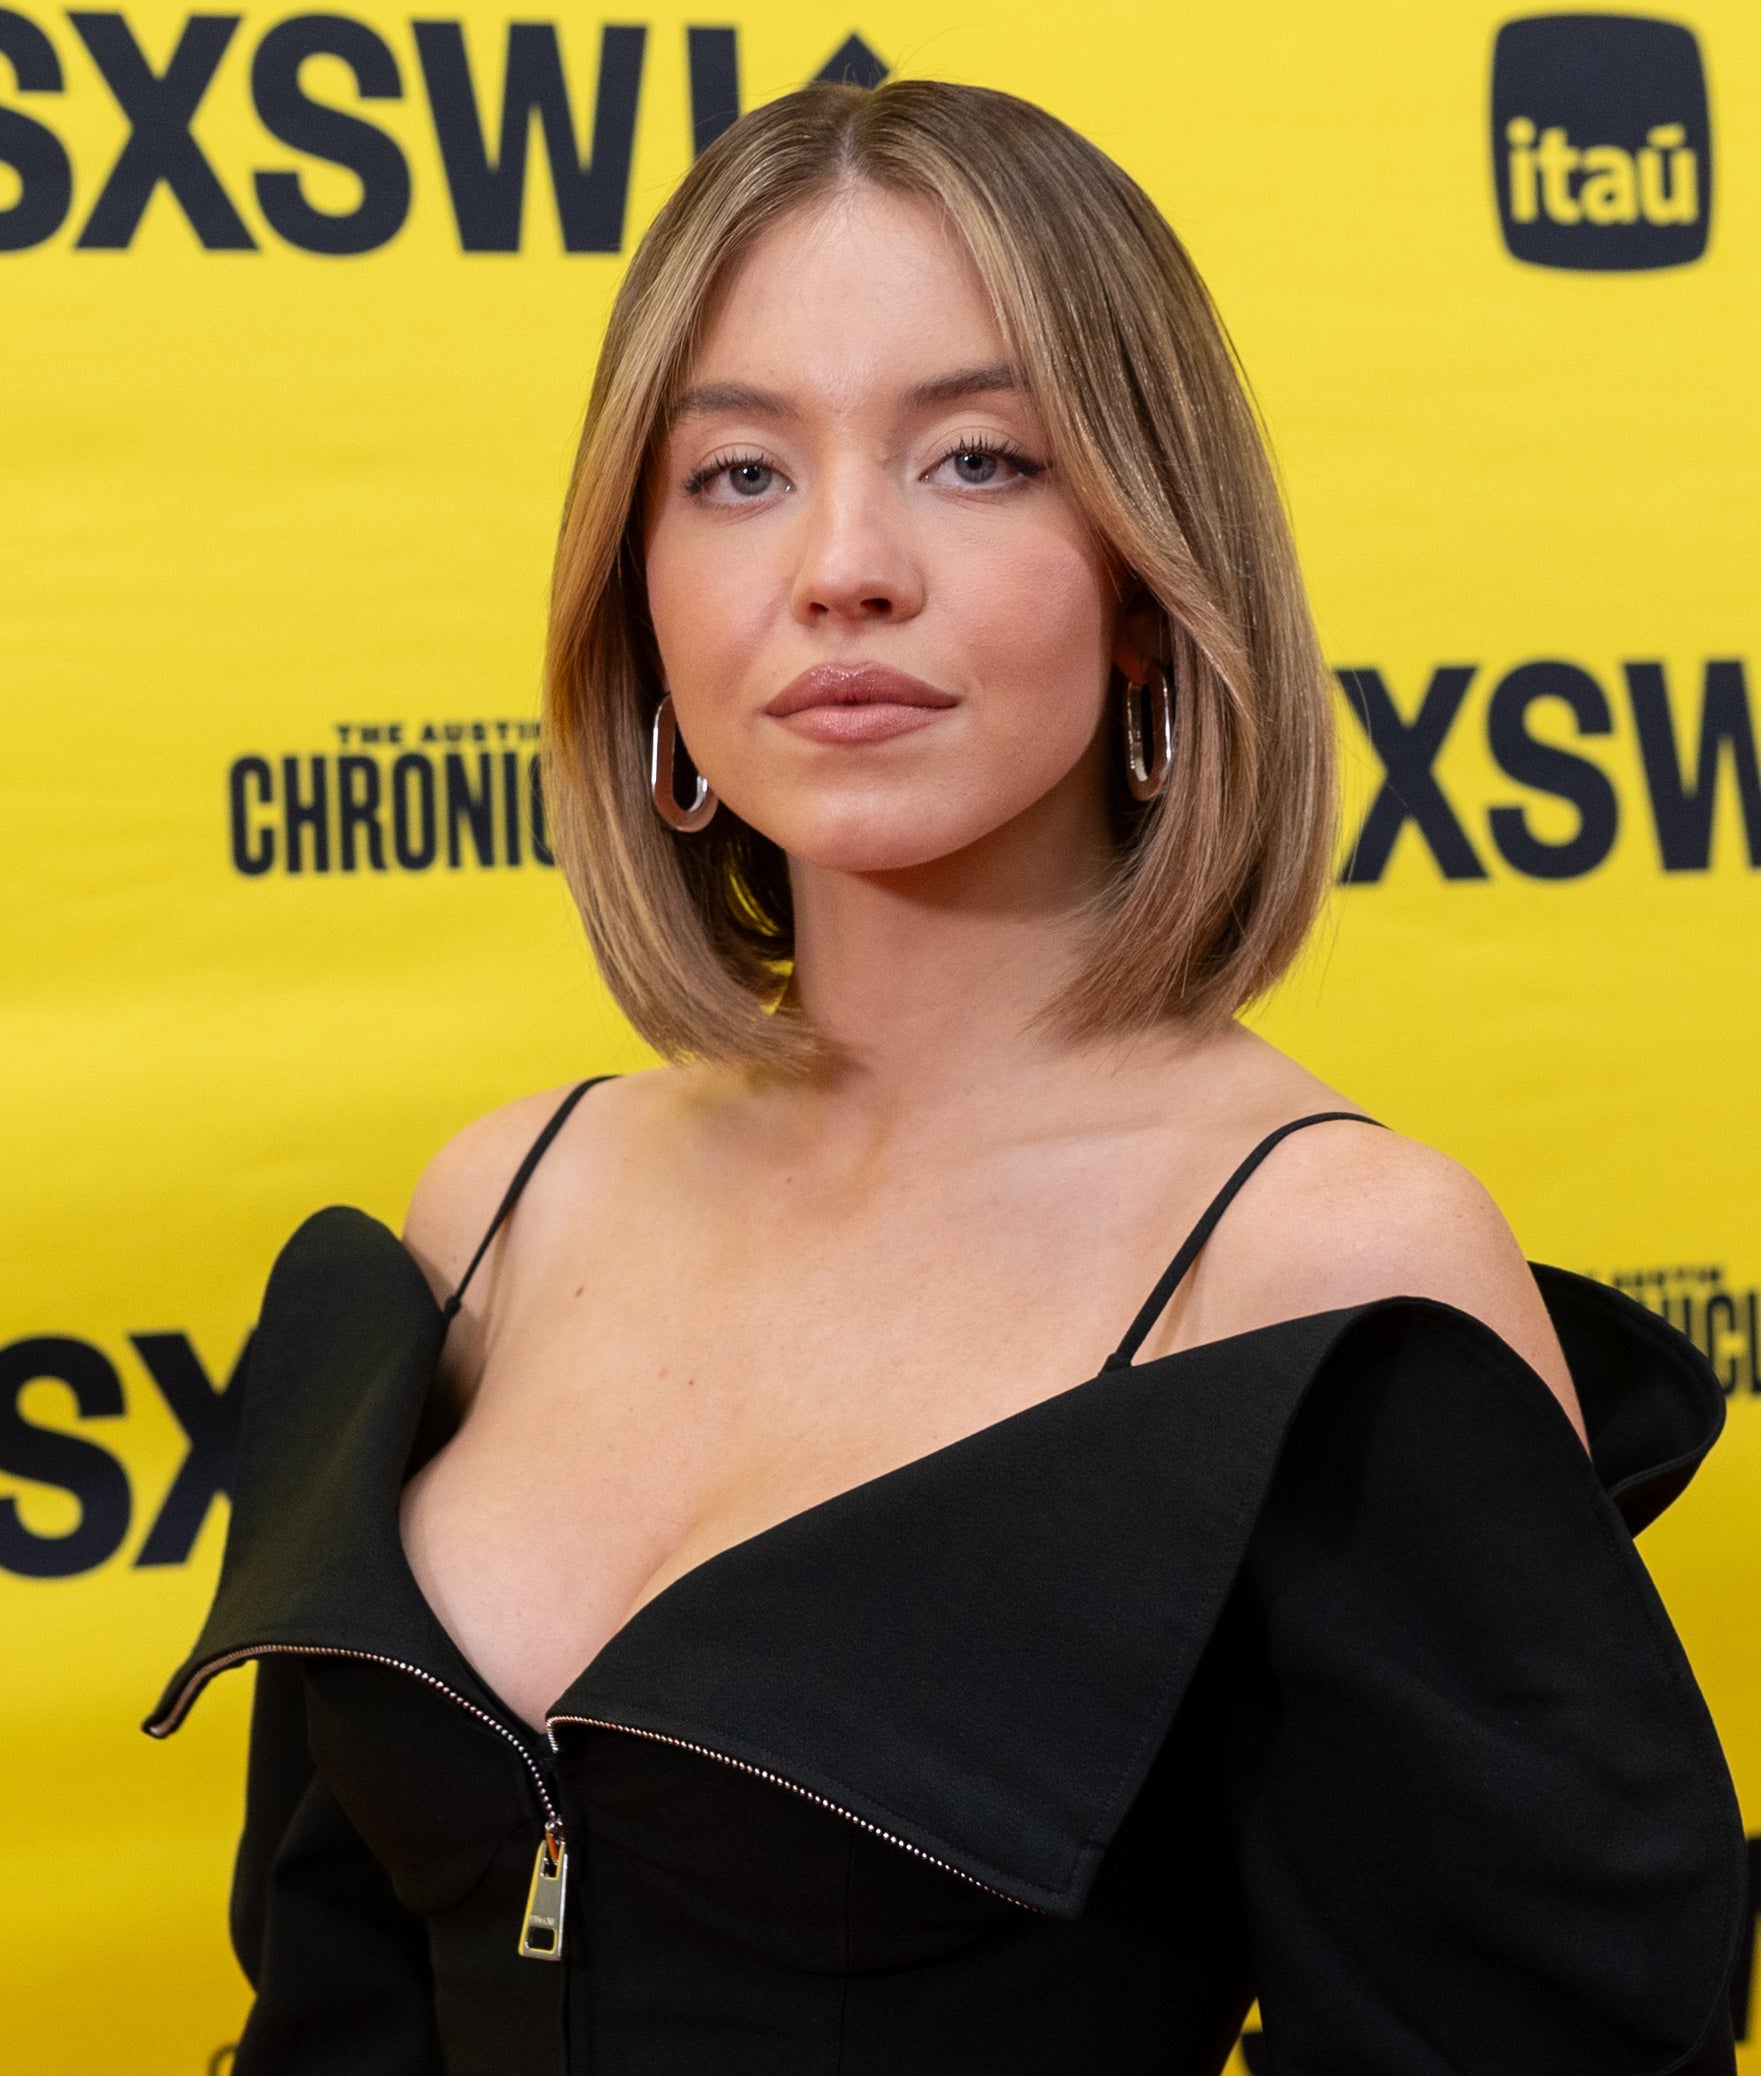 Sydney Sweeney posing at SXSW event in a black off-shoulder dress with a plunging neckline